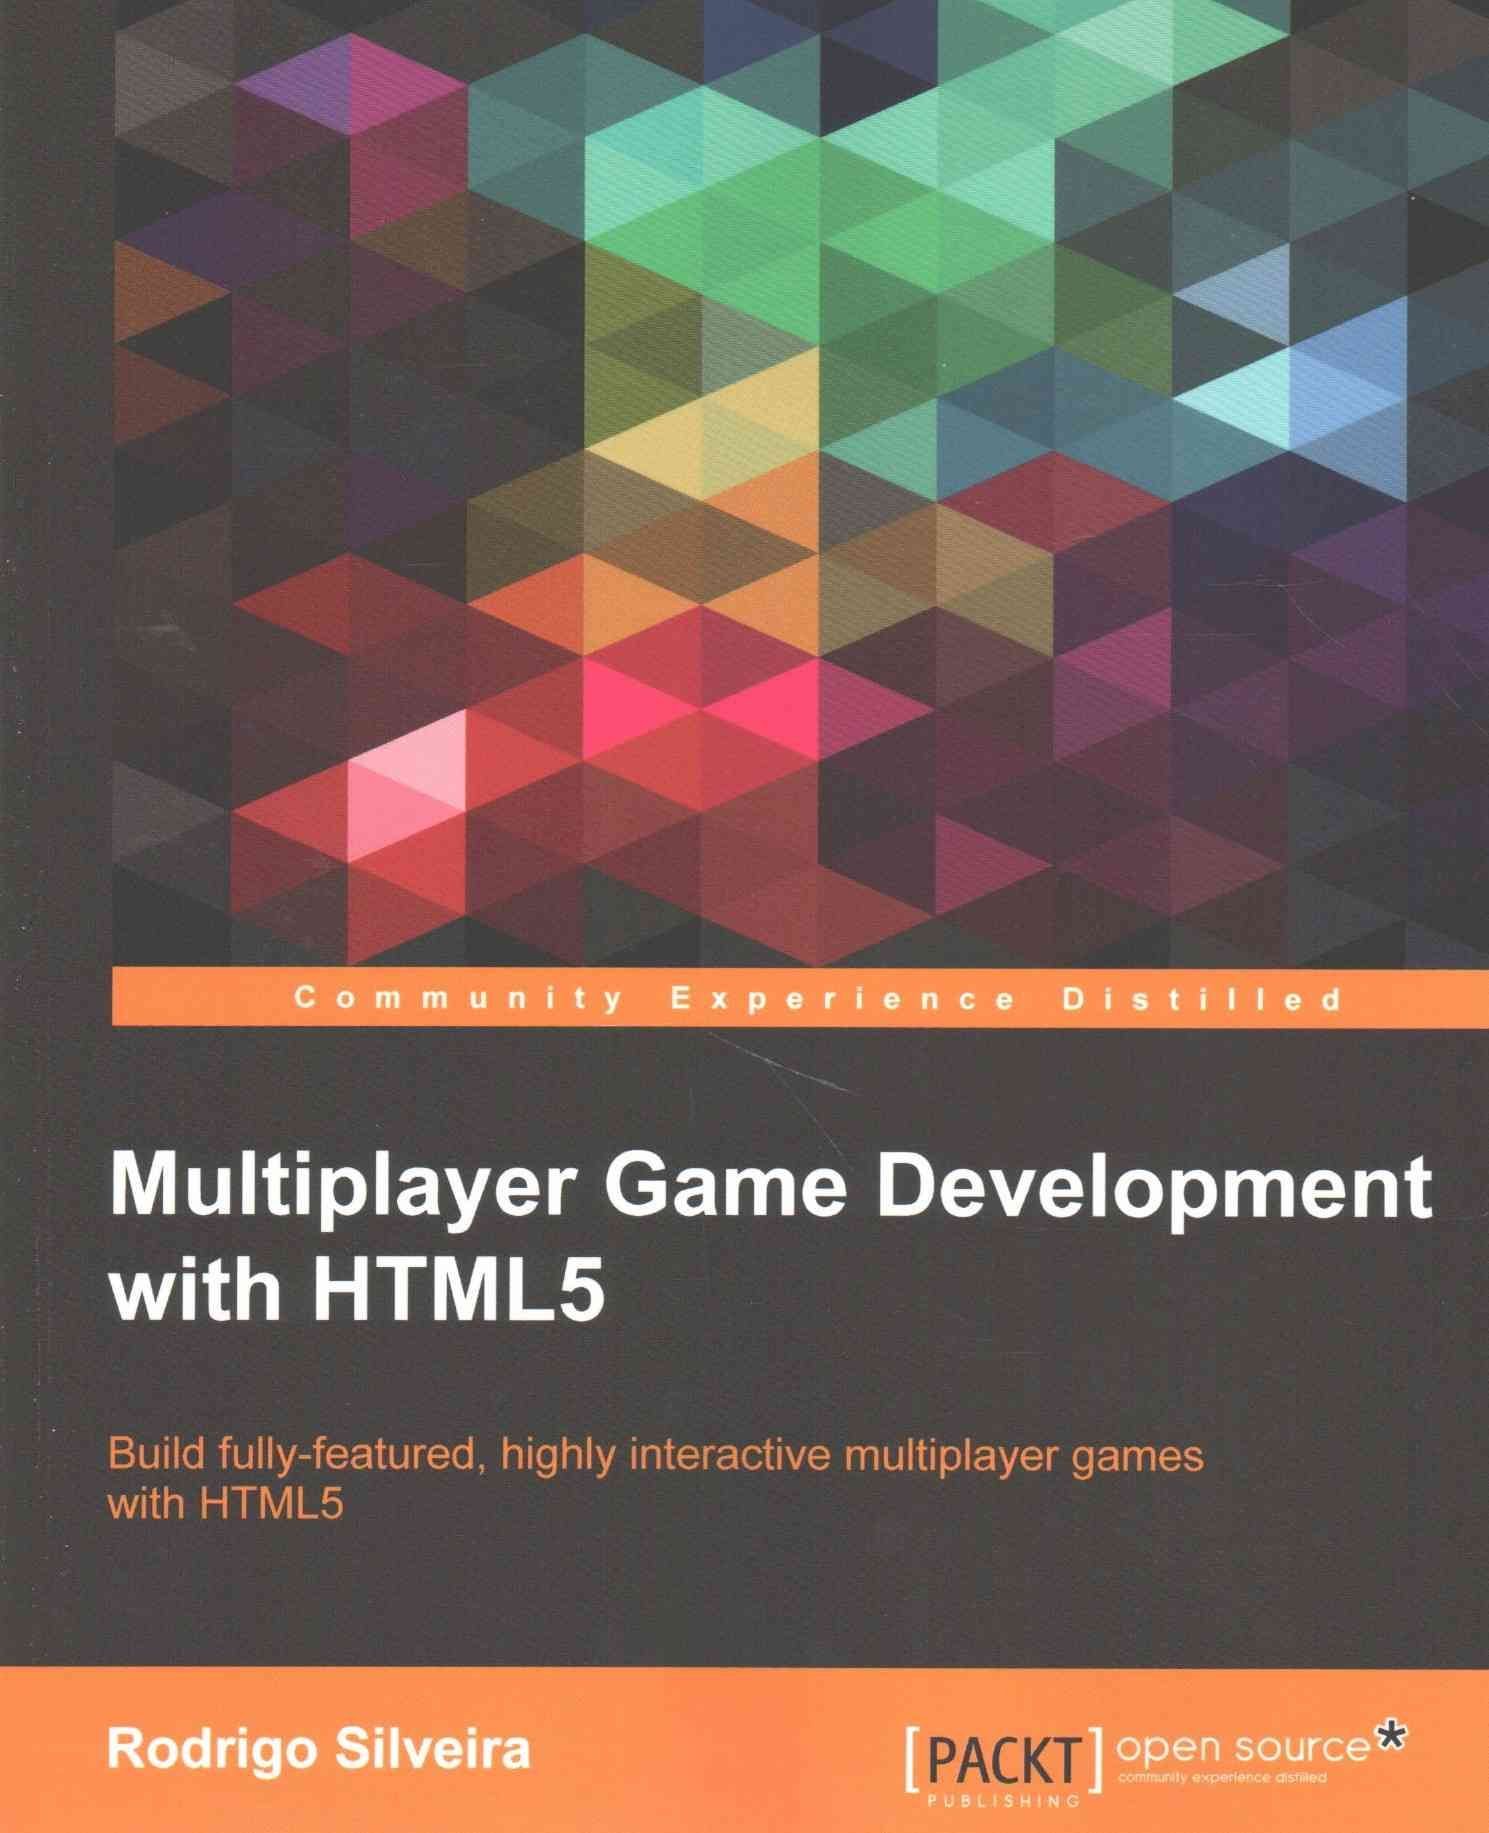 Multiplayer Game Development with HTML5